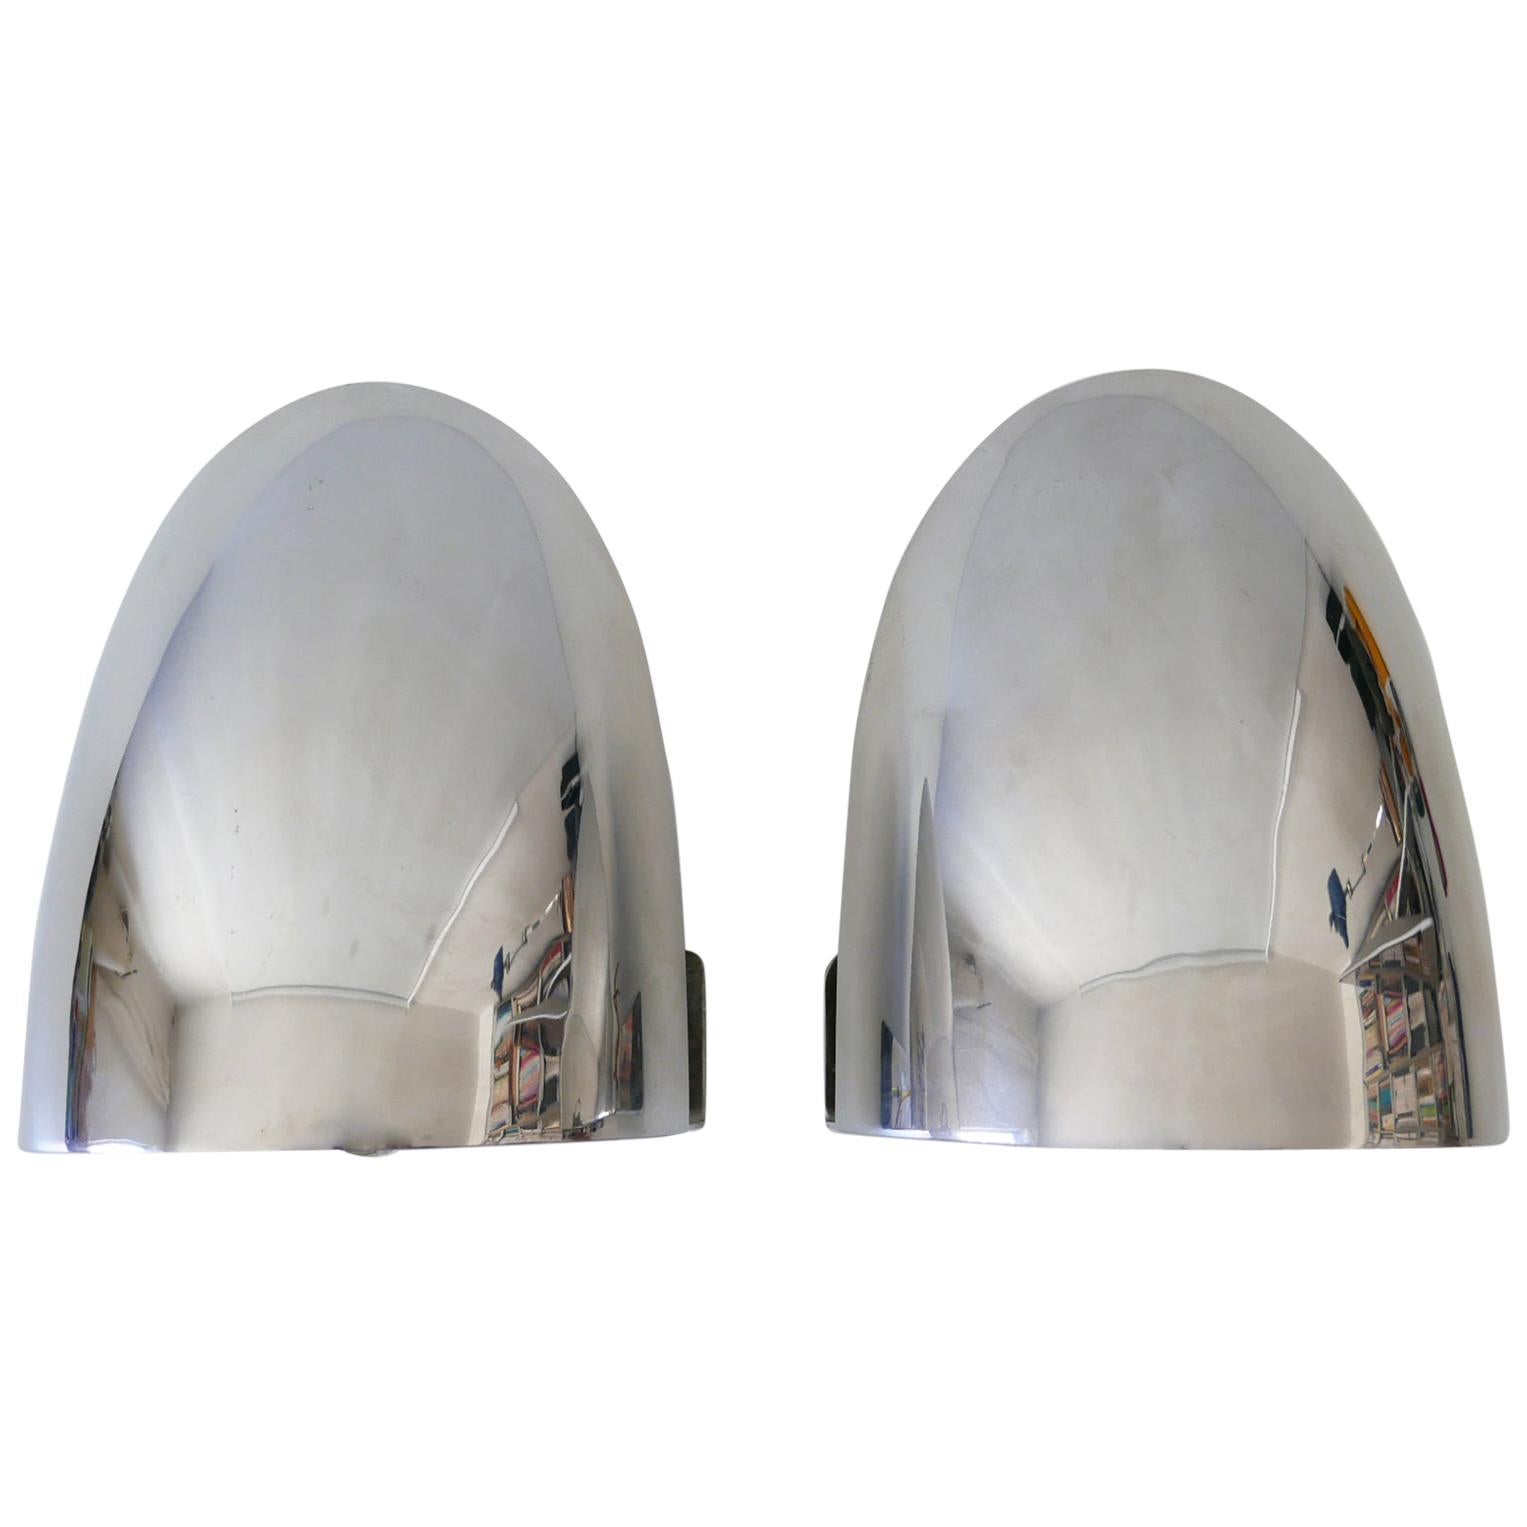 Set of Two Mid-Century Modern Wall Lamps or Sconces, 1970s, Germany